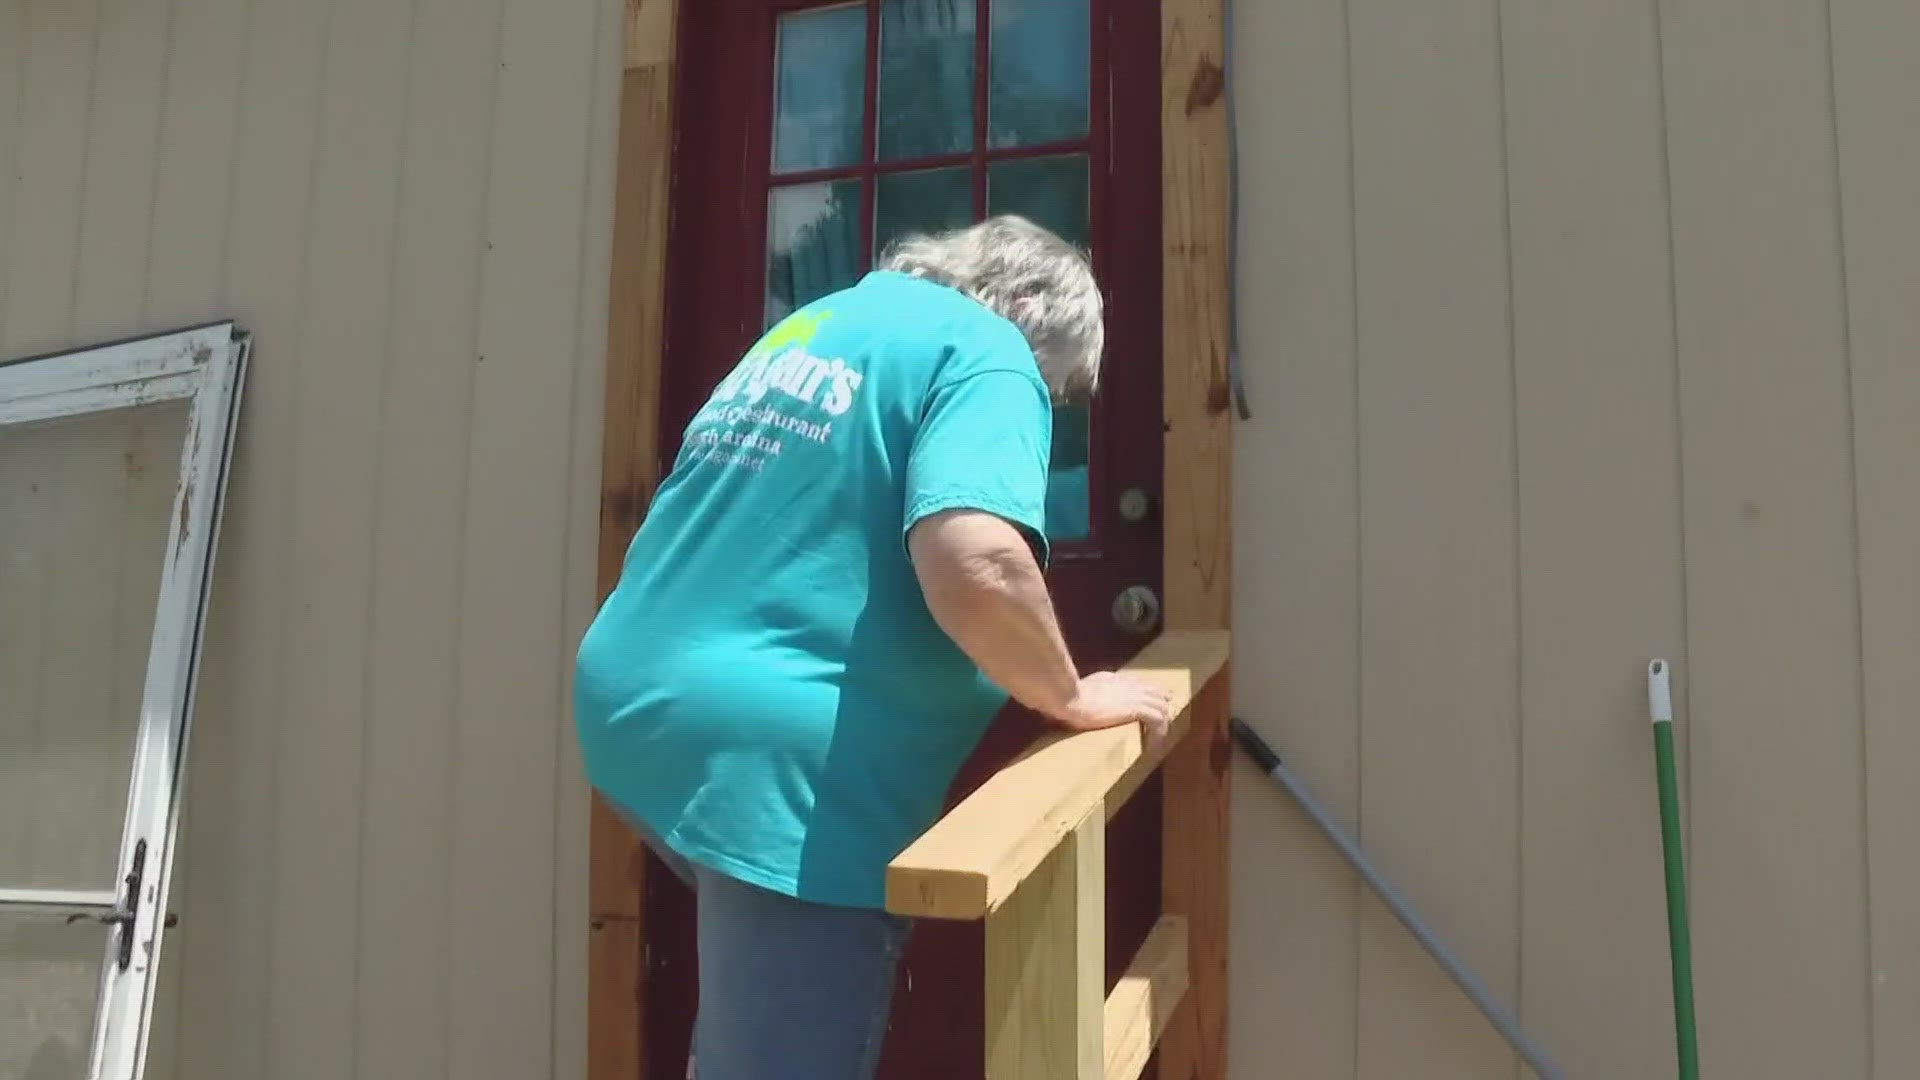 Odes Foster, with T&O Services, has decided to step up for Dianne Yates, 80, and build her a brand-new home at no cost.